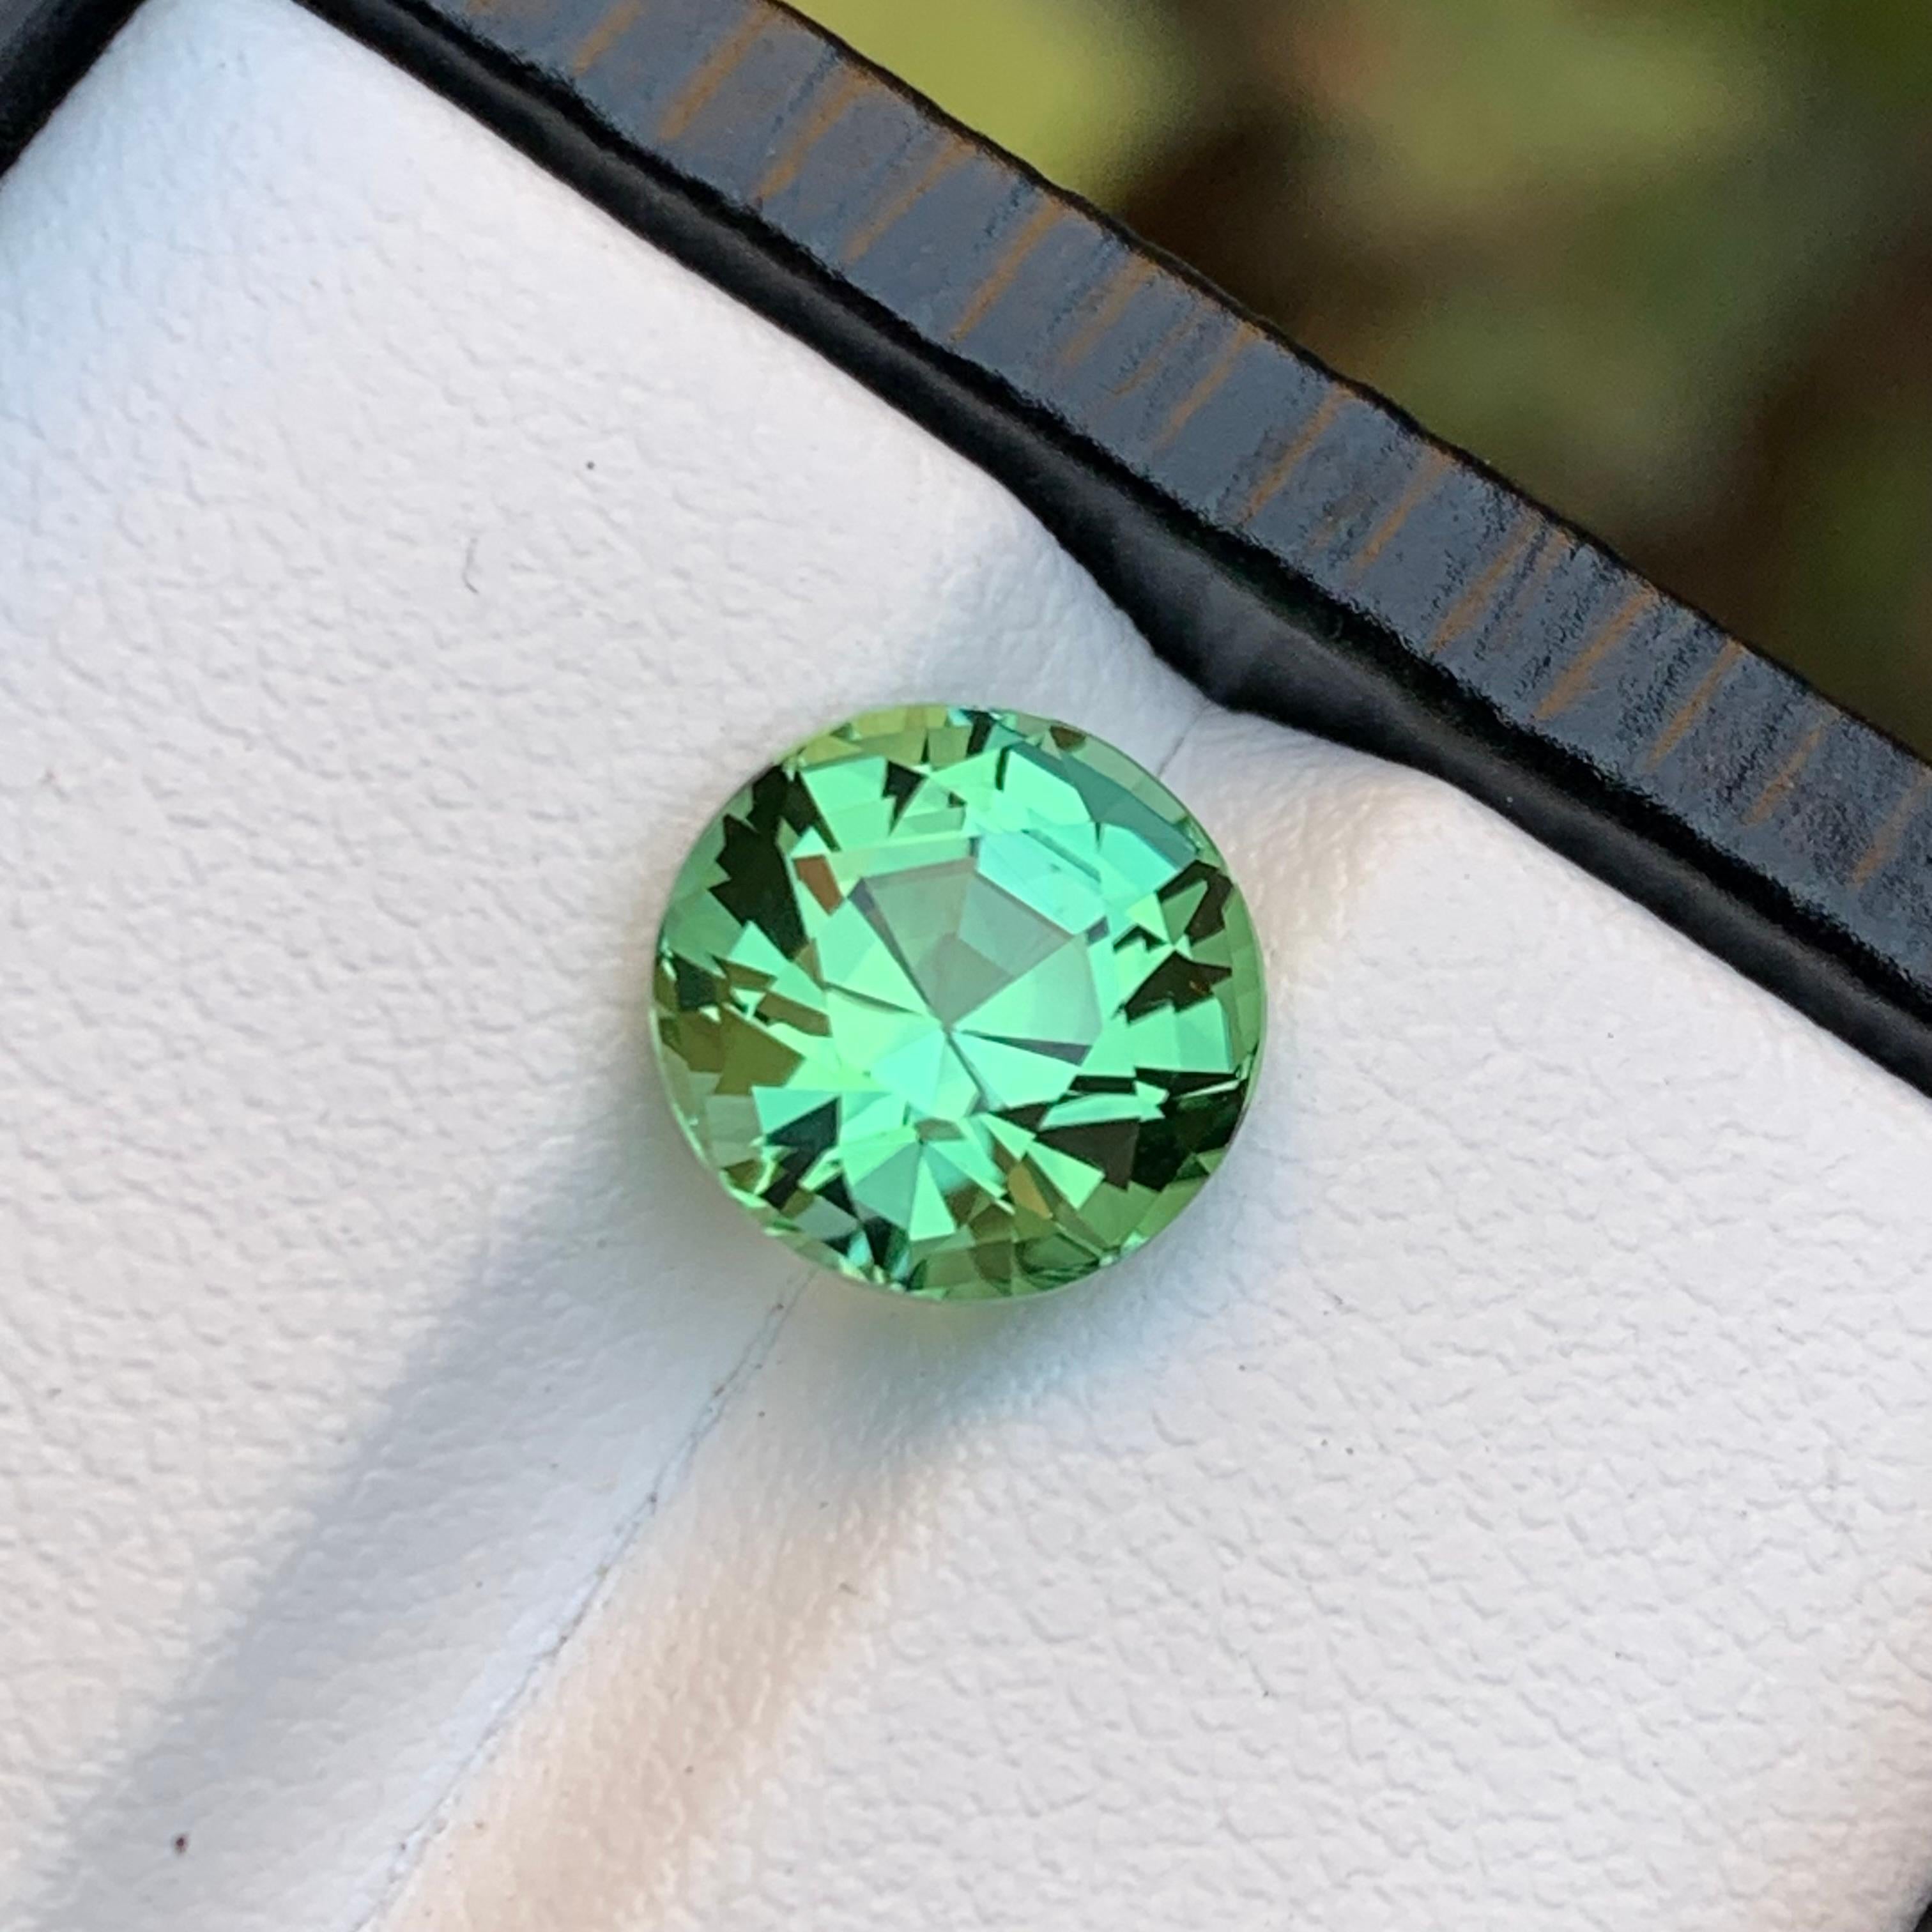 Gemstone Type: Tourmaline
Weight: 2.70 Carats
Dimensions: 8.48 x 8.44 x 6.43 mm
Color: Mint Green
Clarity: Eye Clean
Treatment: Untreated 
Origin: Afghanistan 🇦🇫 
Certificate: On demand 

This stunning round brilliant mint green tourmaline